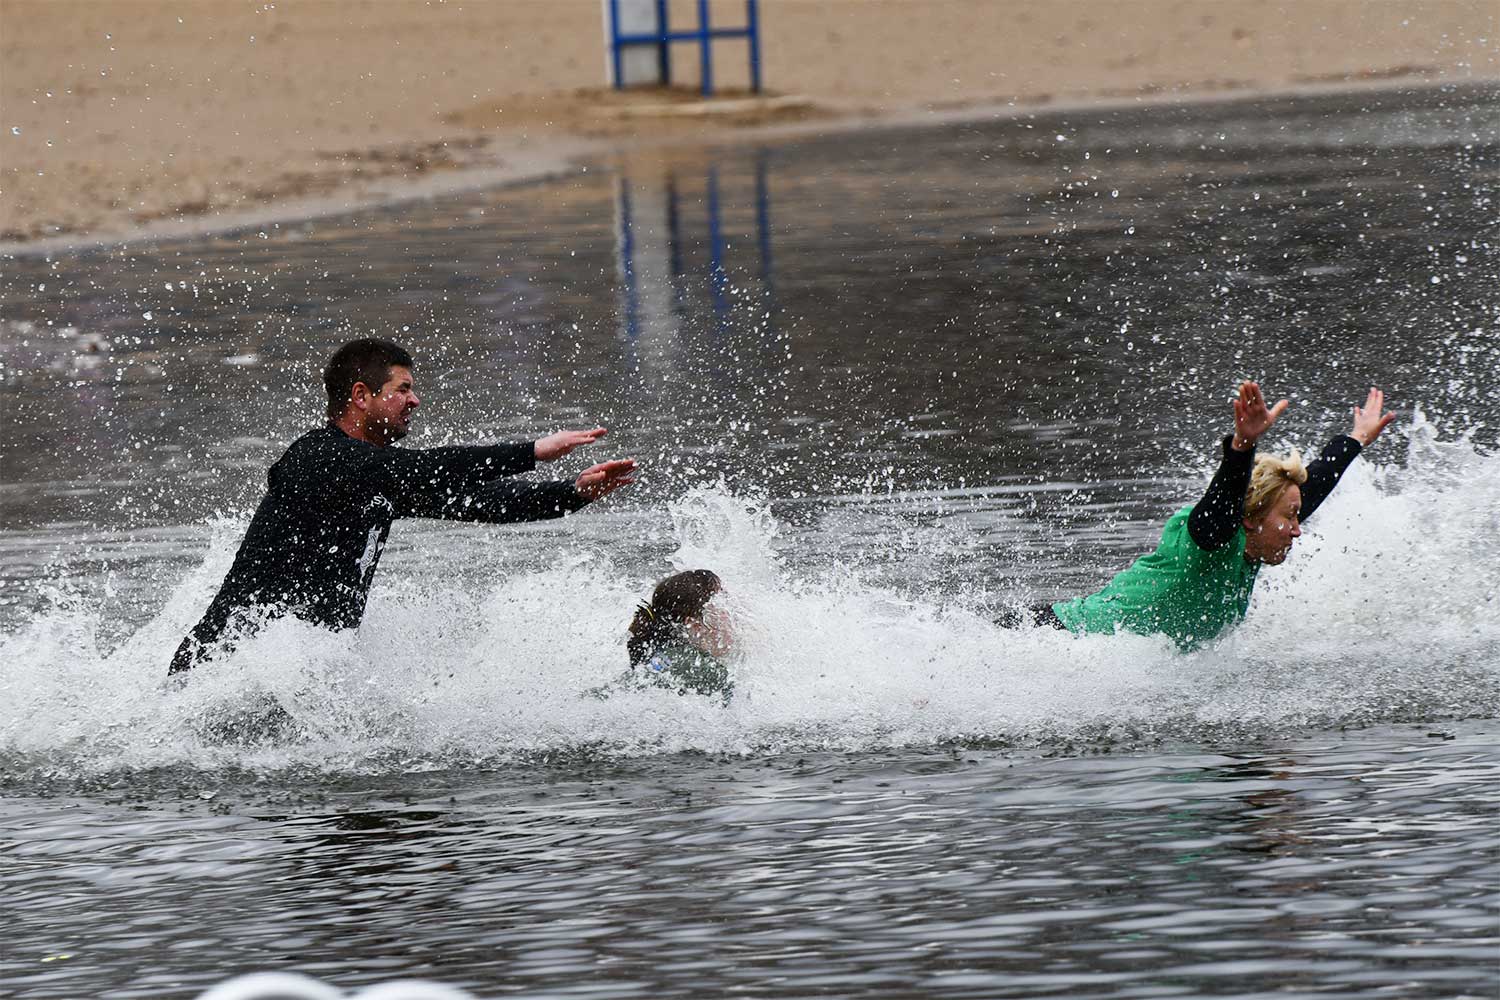 People splash into the water during the Polar Plunge.